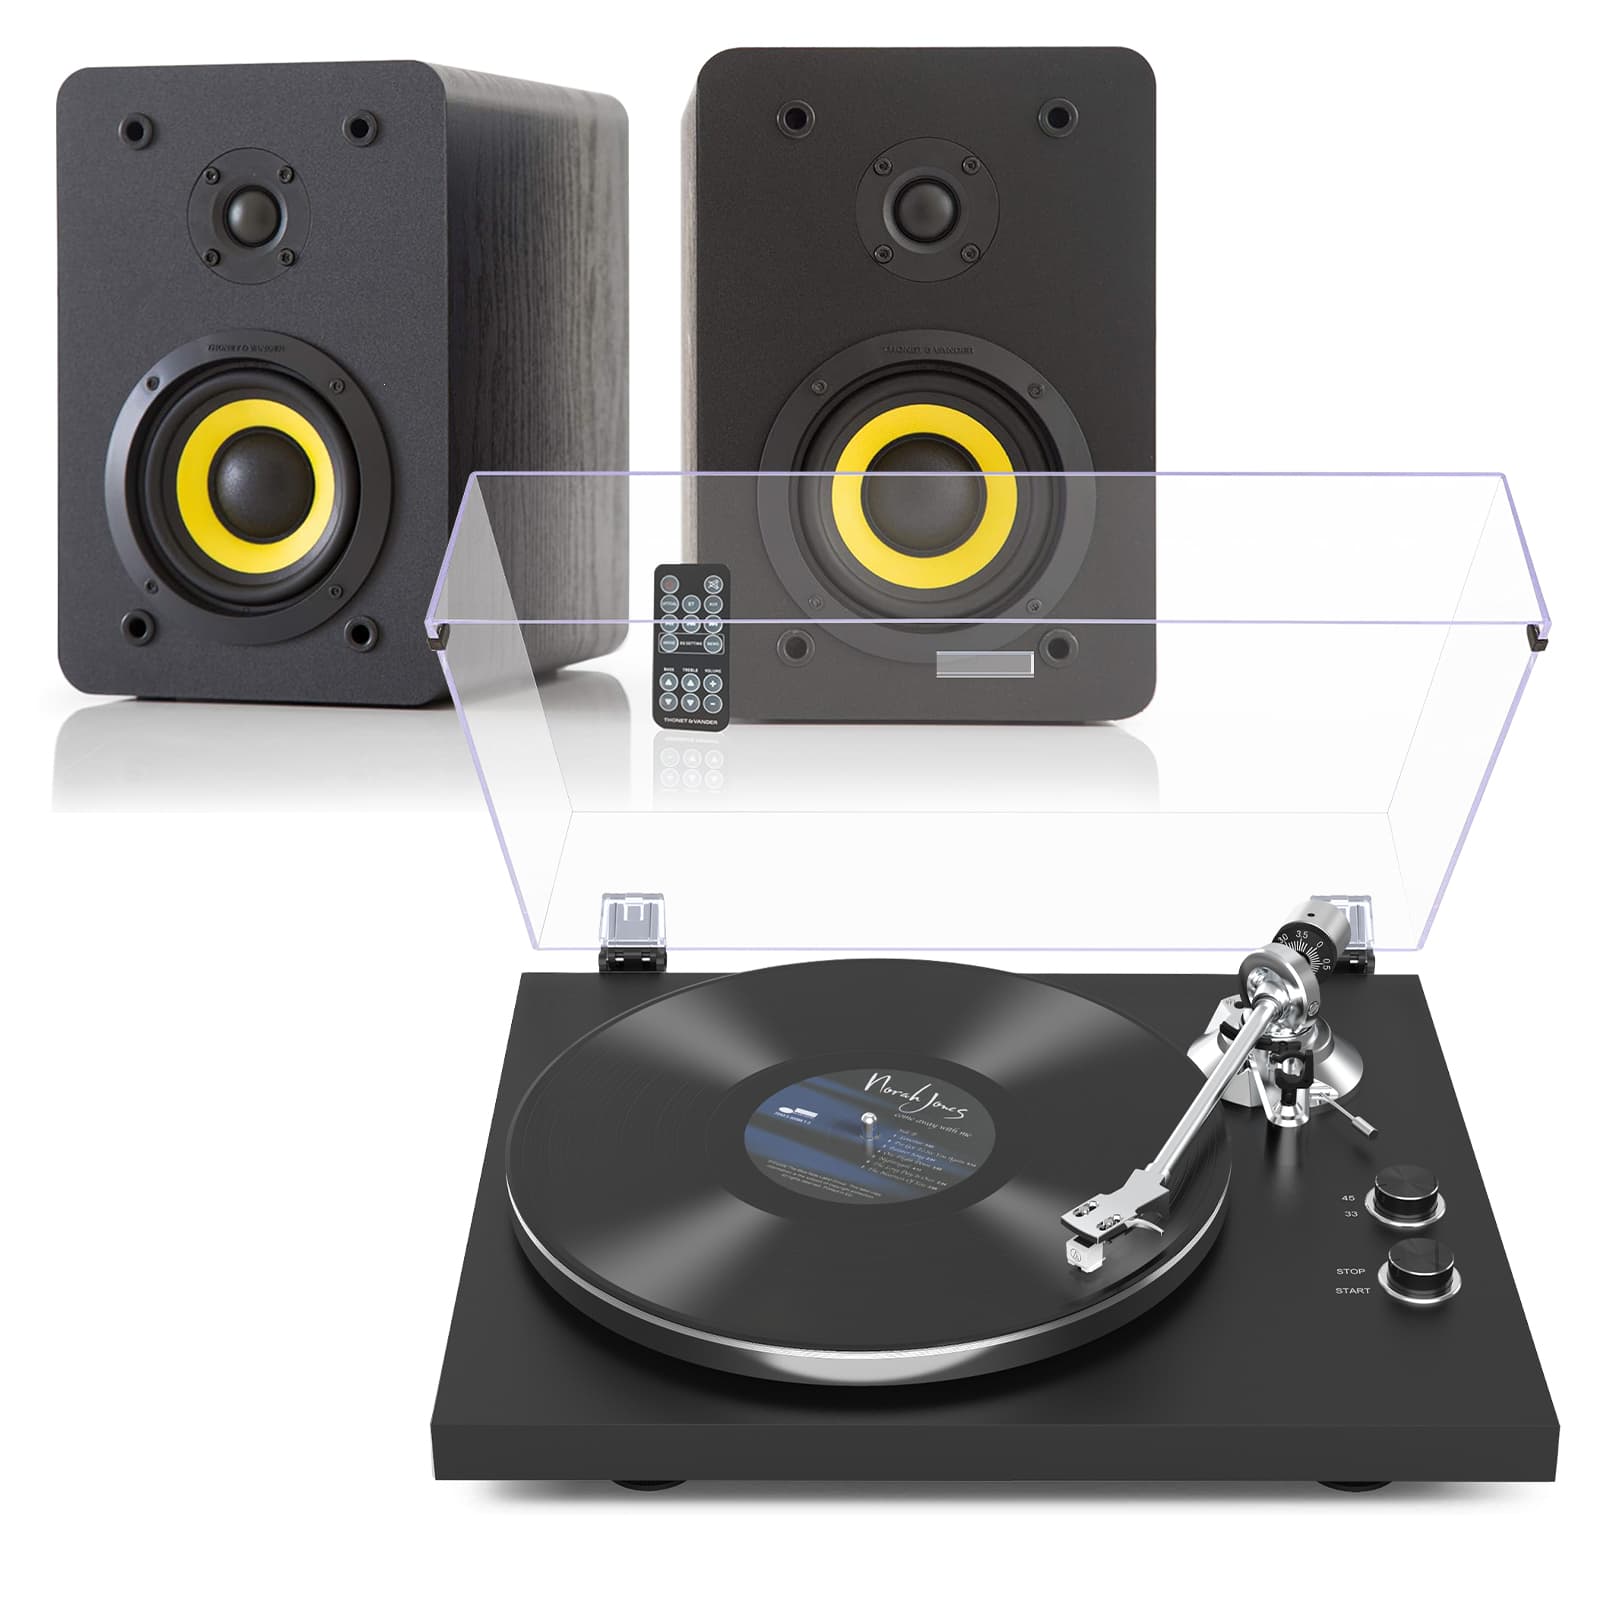 HQKZ-006 High Fidelity Turntable with Thonet and Vander Integrated Bluetooth Bookshelf Speaker